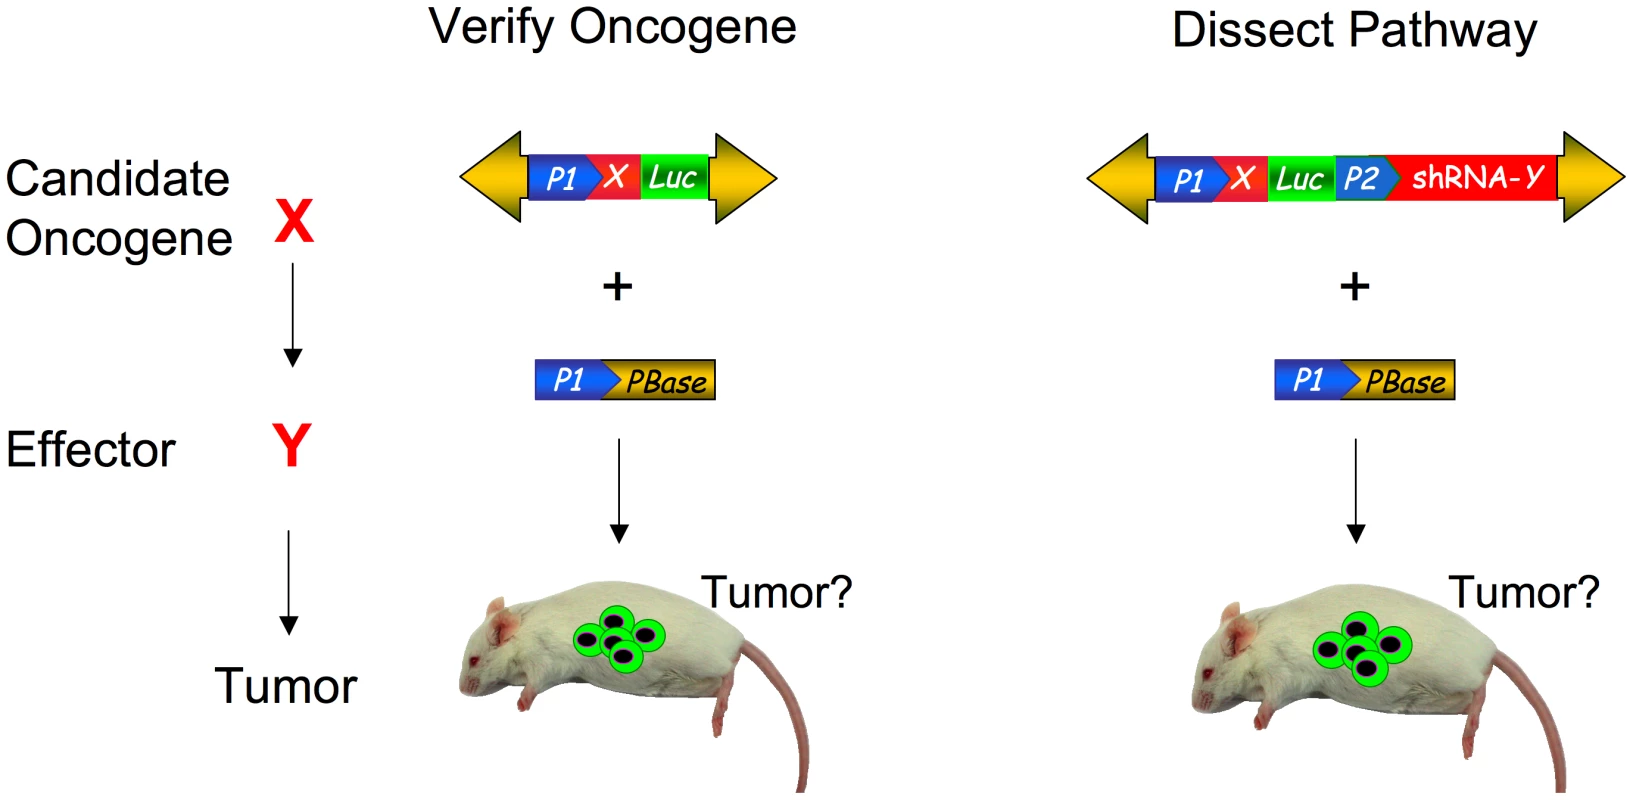 Somatic phenotypes like cancer can be modeled and genetically dissected with transposon mutagenesis.